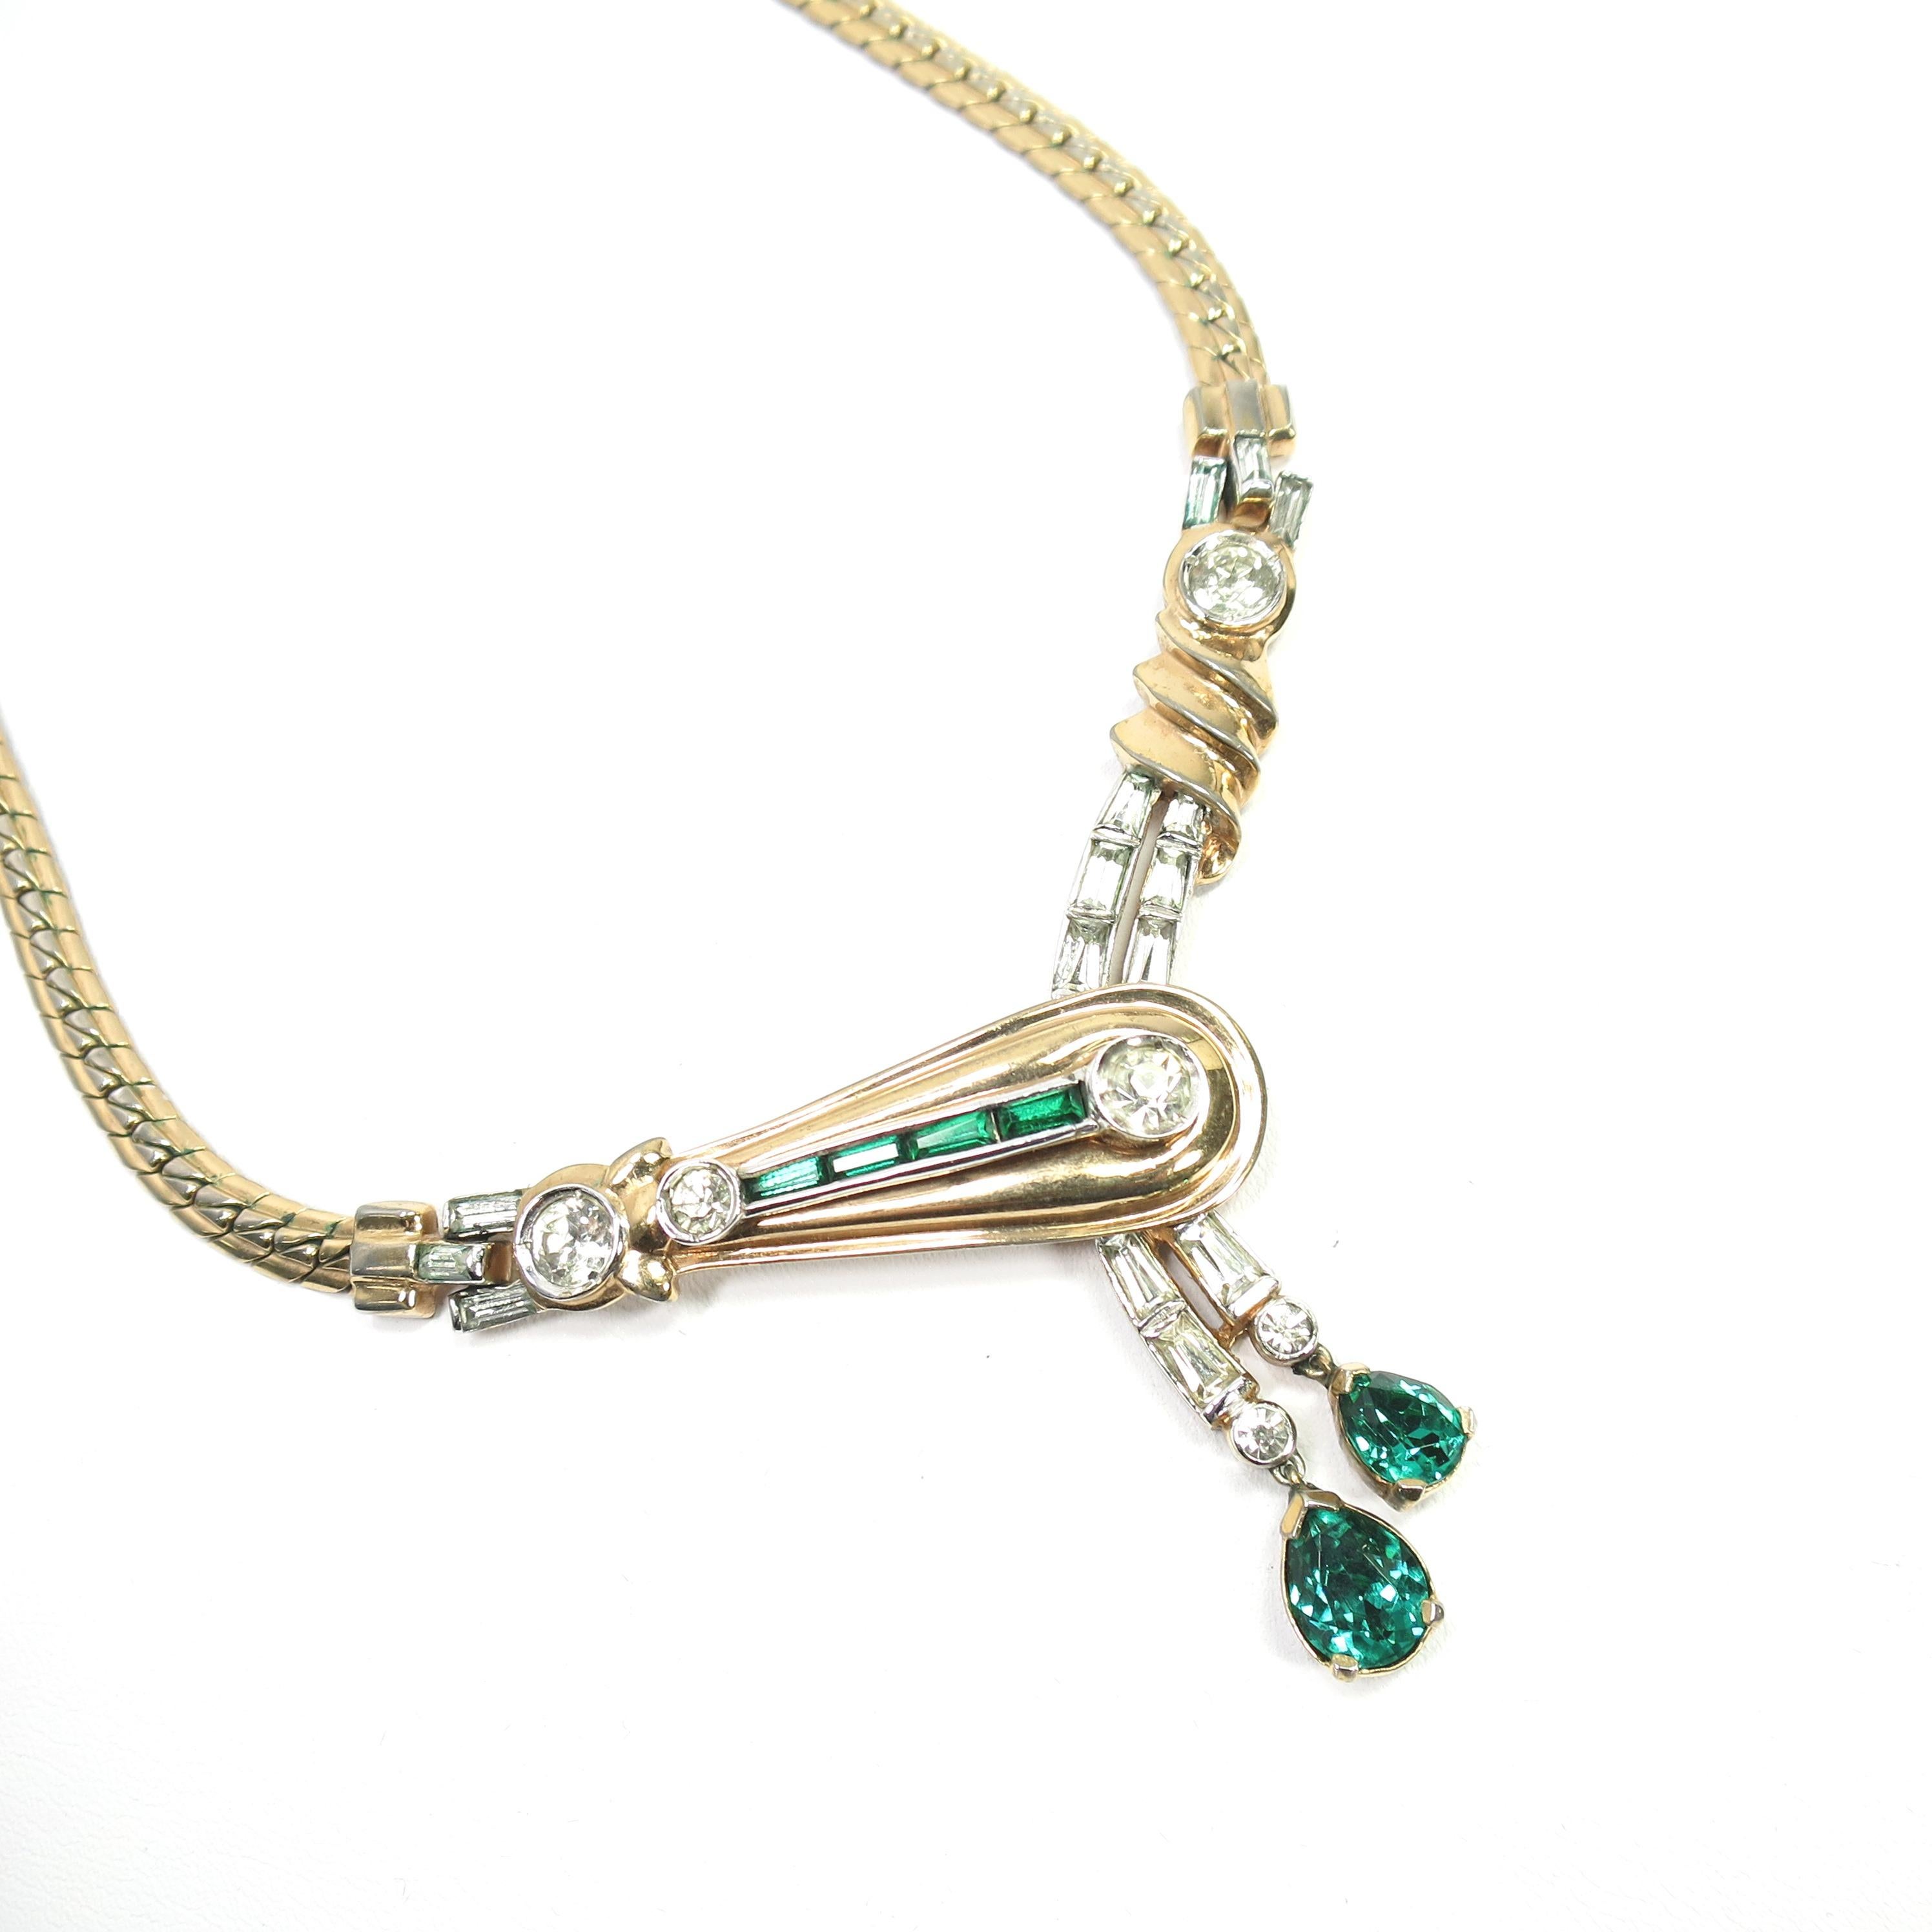 Mazer Bros. Gold & Rhodium Emerald Asymmetrical Necklace & Earrings Set, 1940s For Sale 1